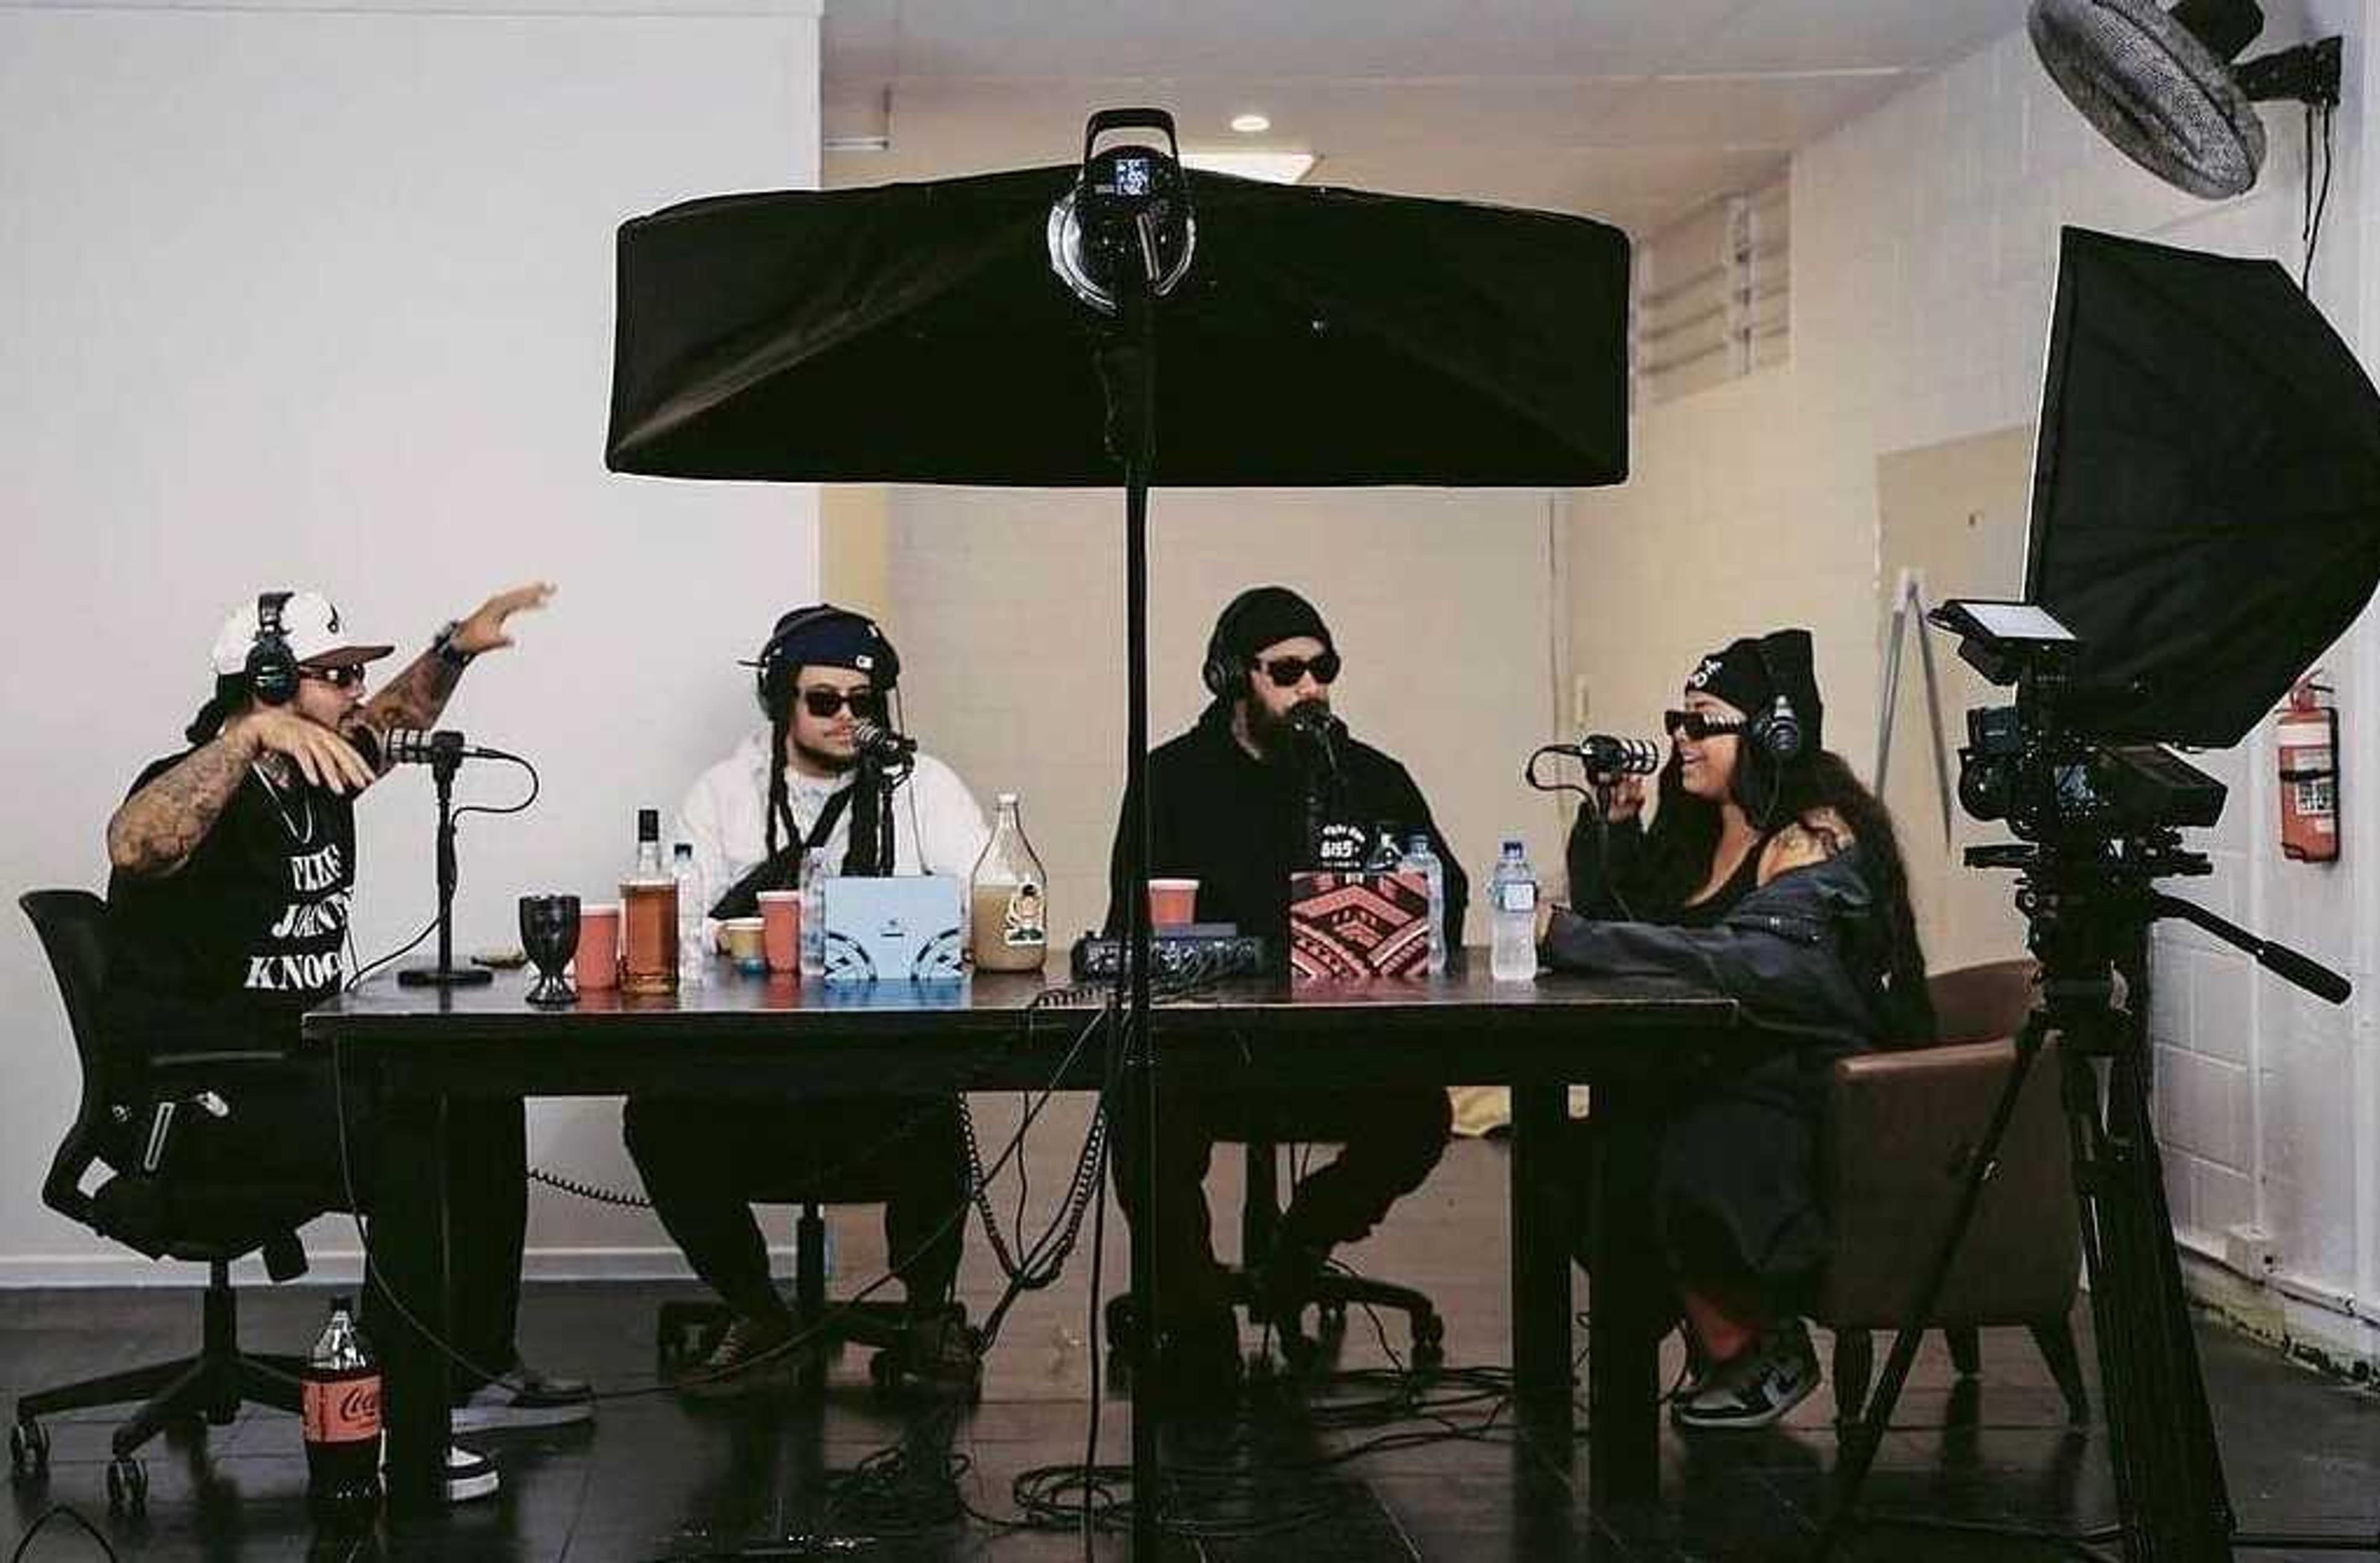 ​The Village Council Podcast is recorded in Avondale. From left: Poetik (Ventry Parker), Melodownz (Bronson Price), Bass685 (Bass Tauiliili) and Tenelle. Photo/Angelo Toalepai​